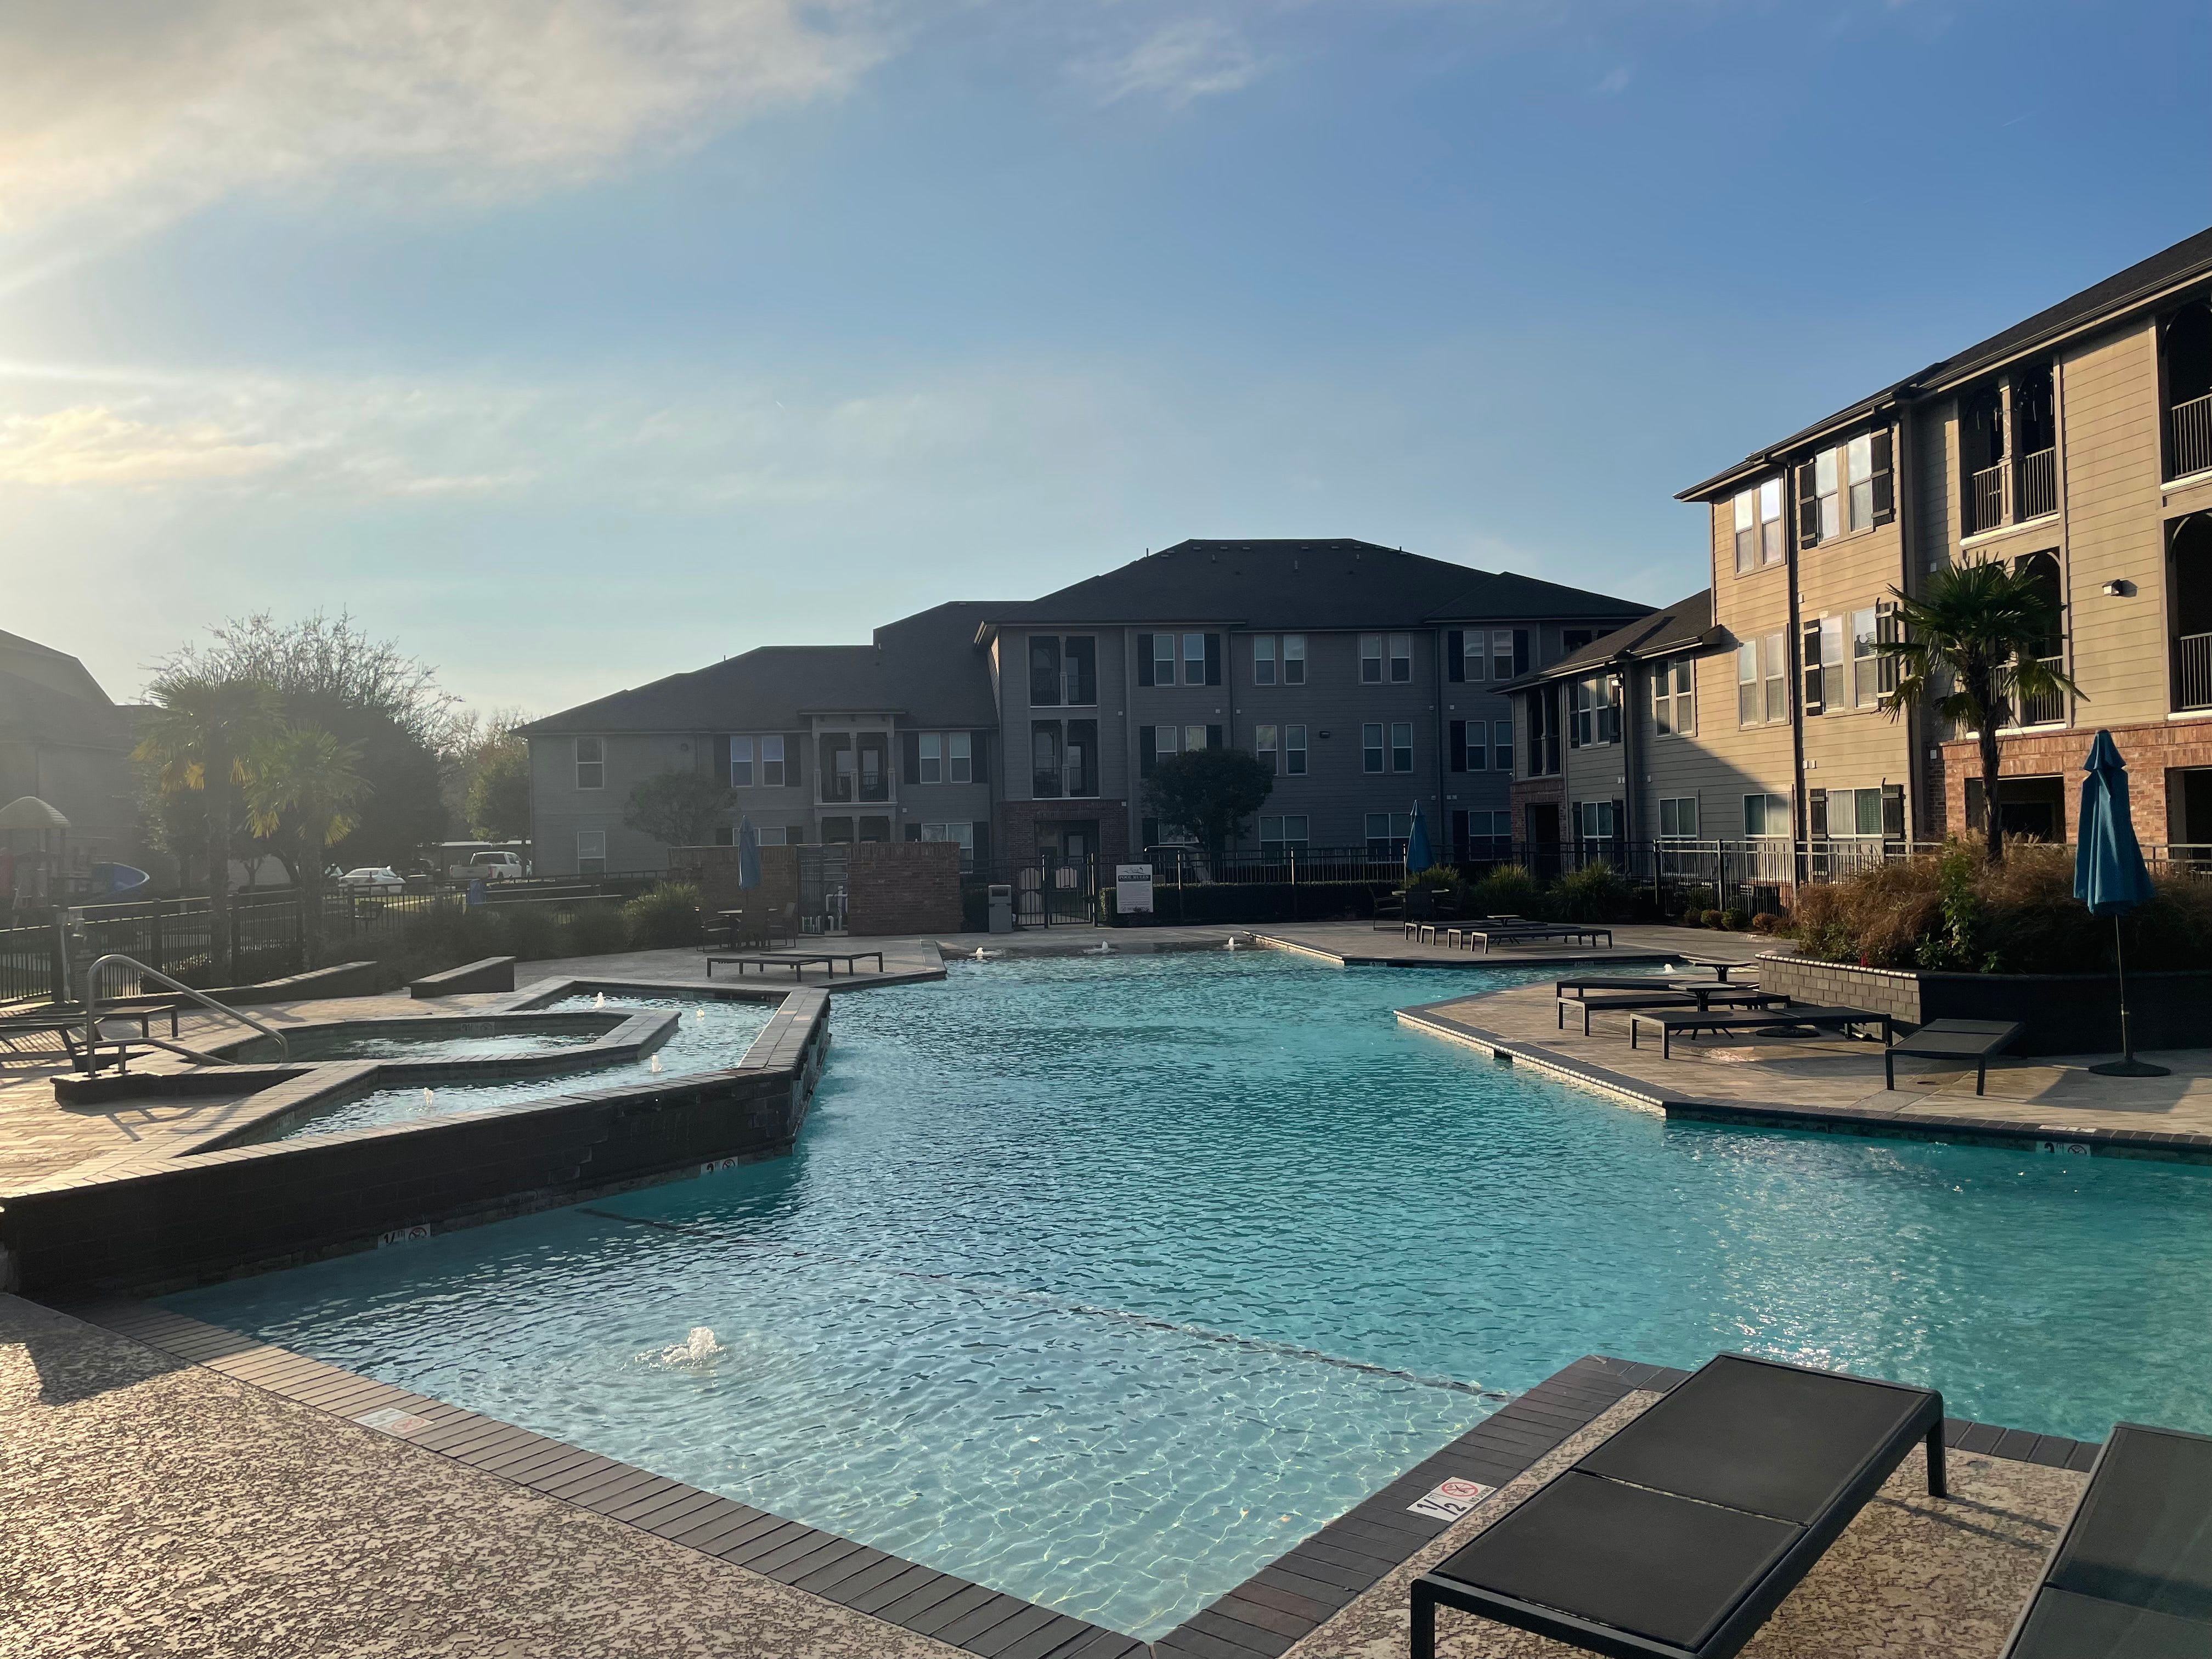 Kids putting their feet in the pool and looking at her phone at Le Rivage Luxury Apartments in Bossier City, Louisiana